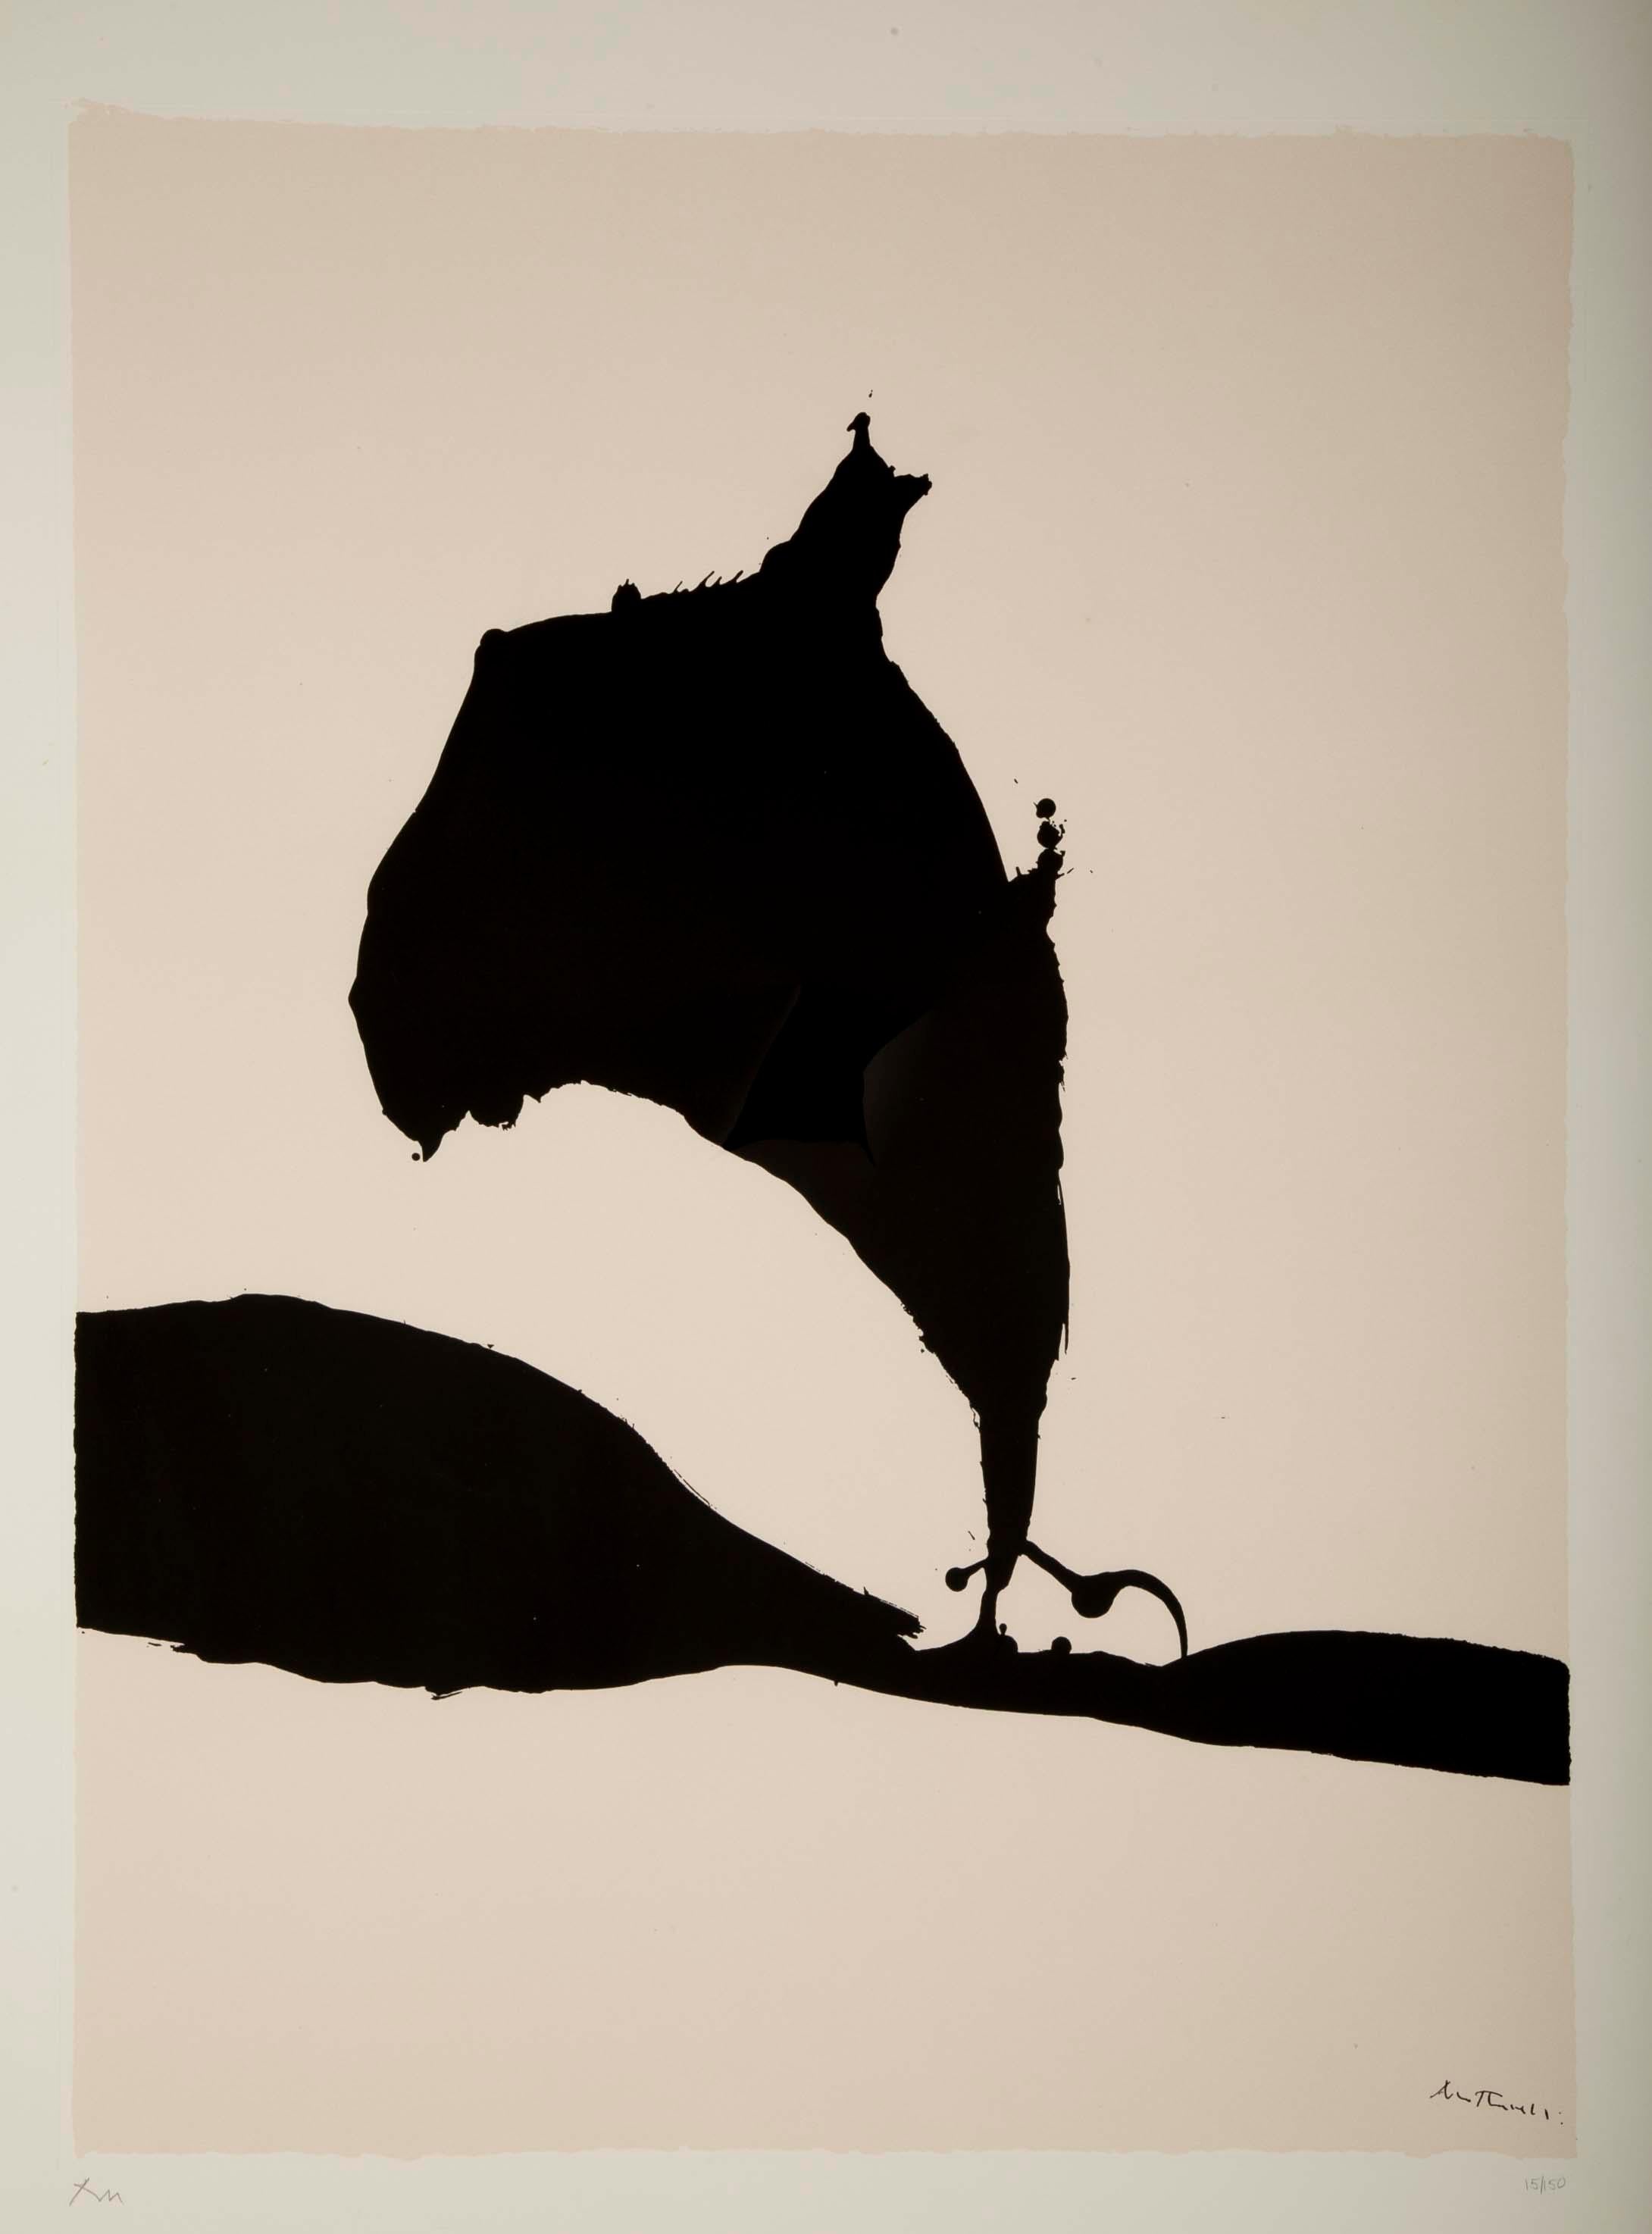 A silkscreen by Robert Motherwell. This silkscreen is from his Africa suite and is number 9 from a portfolio of 150. Signed and numbered. Archivally framed using acid free materials in a 22-karat gold leaf frame.